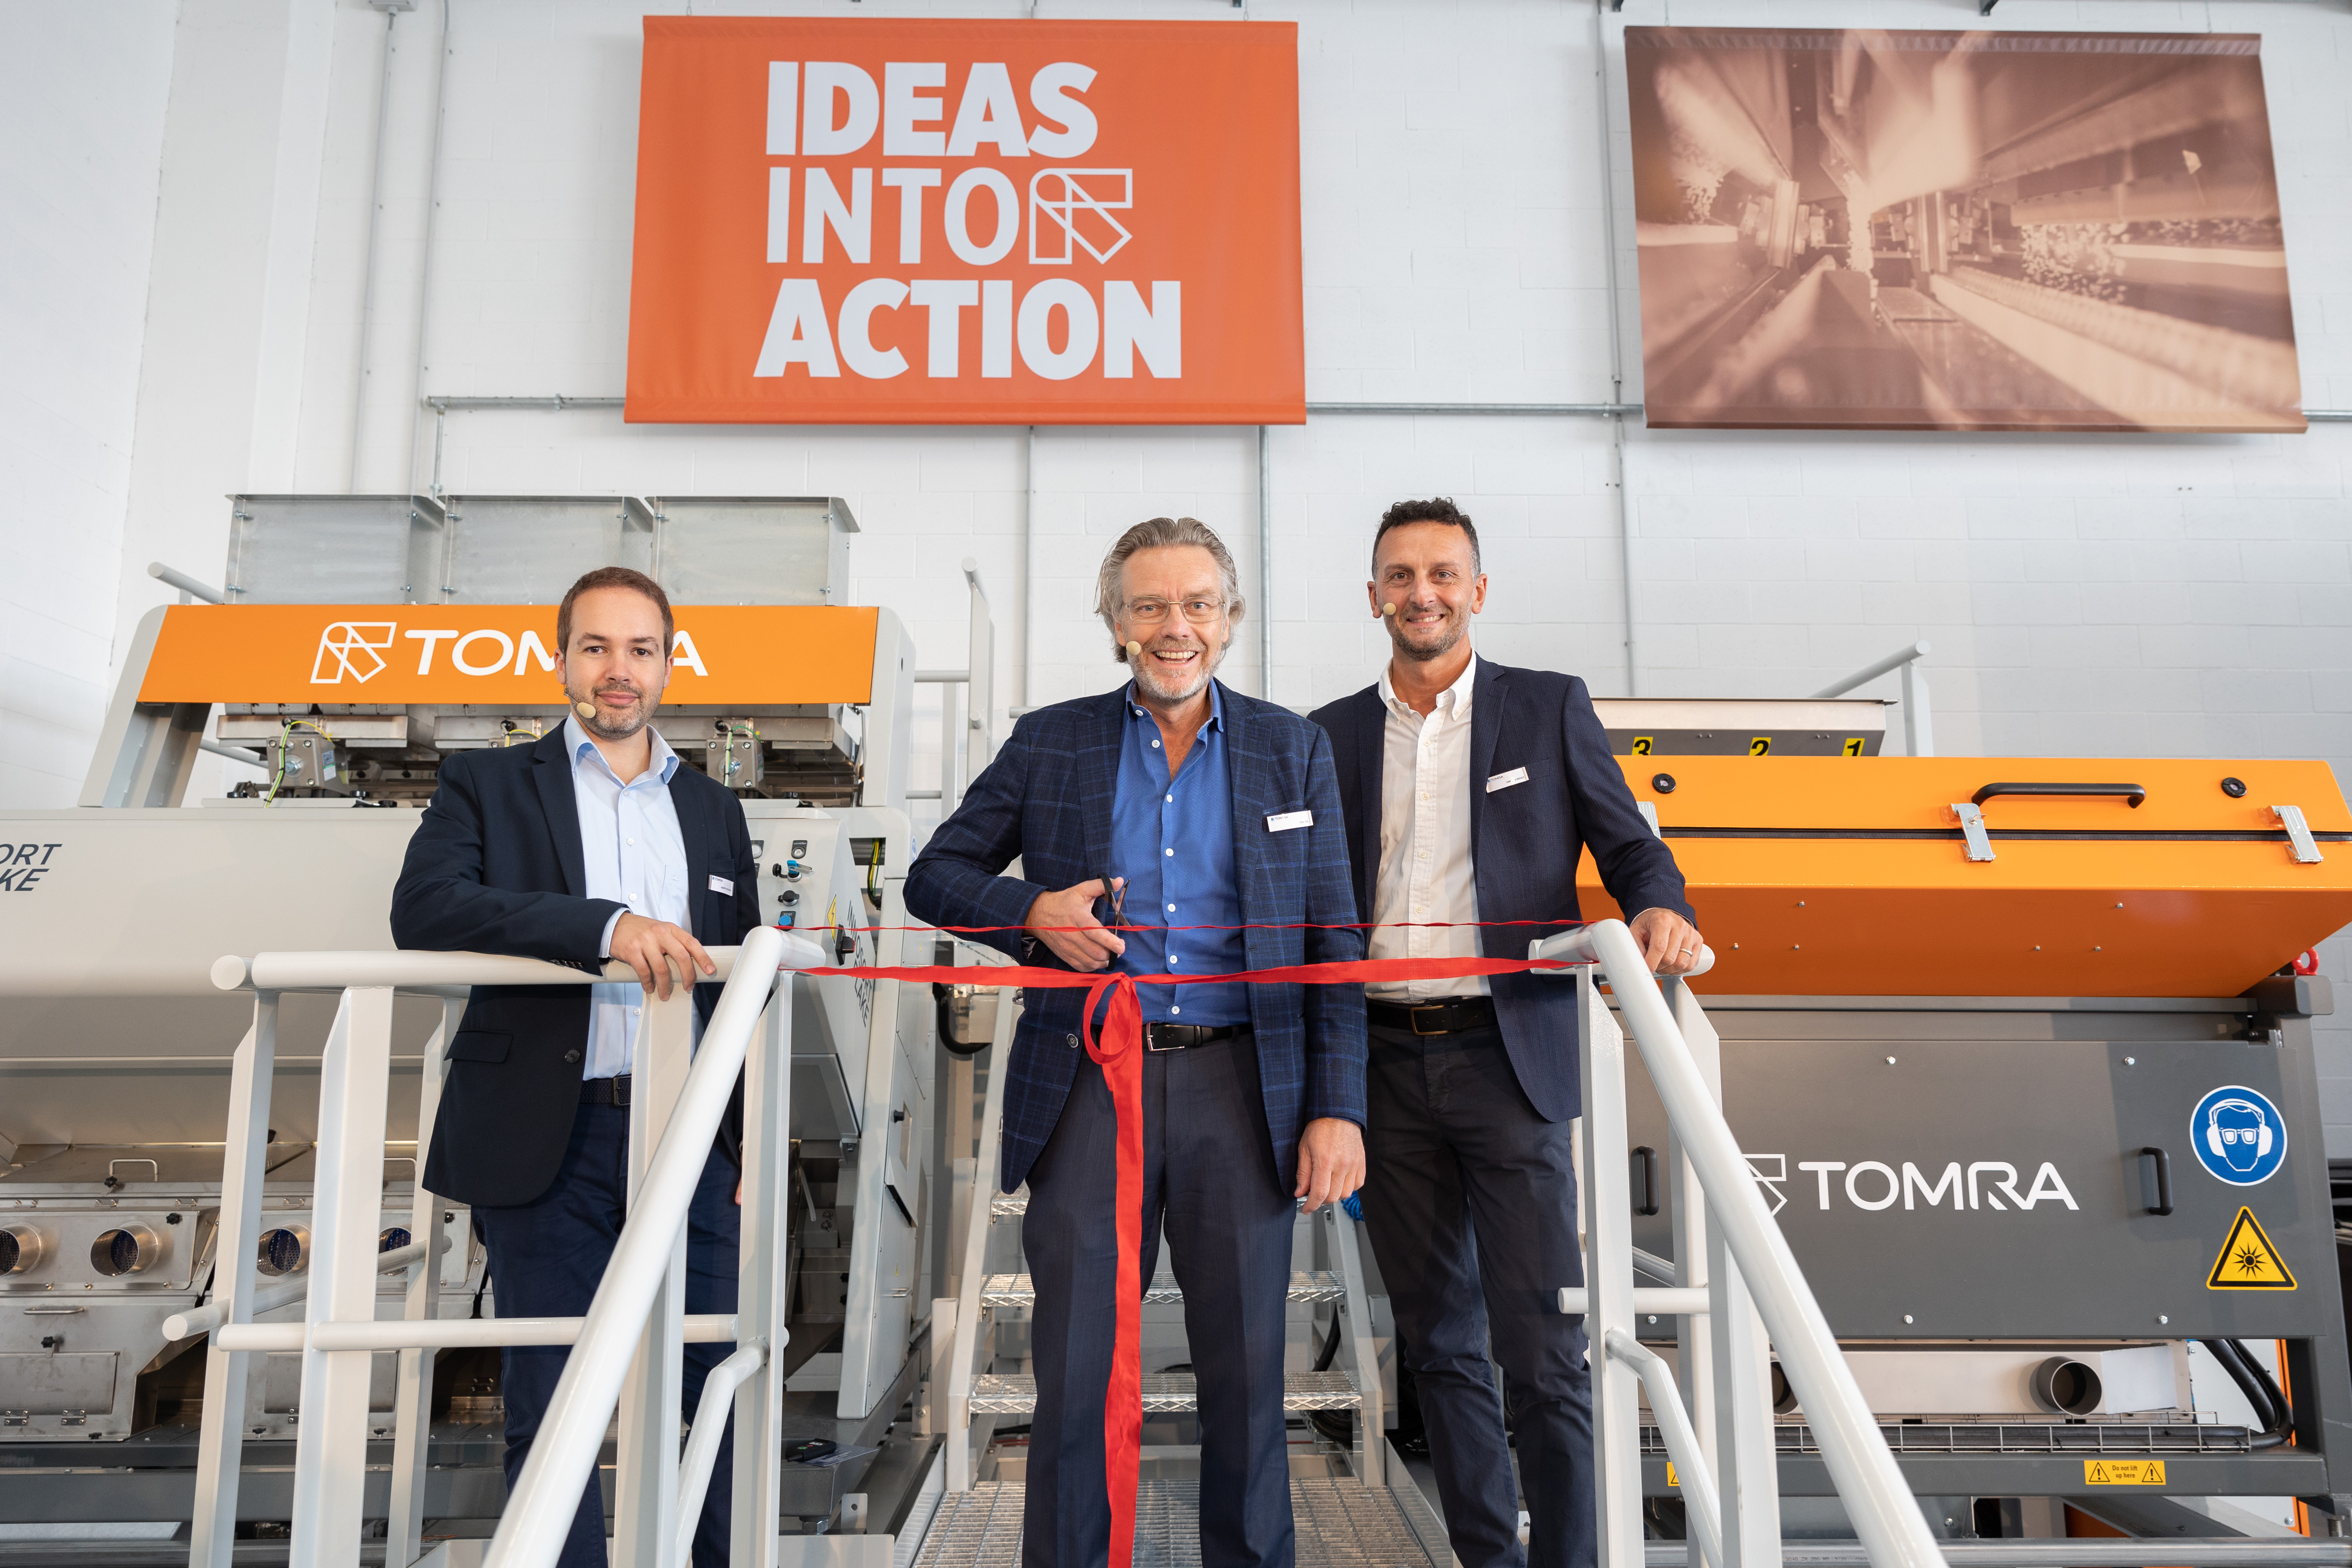 TOMRA_Ribbon cut by Tom Eng - SVP and Head of TOMRA Recycling